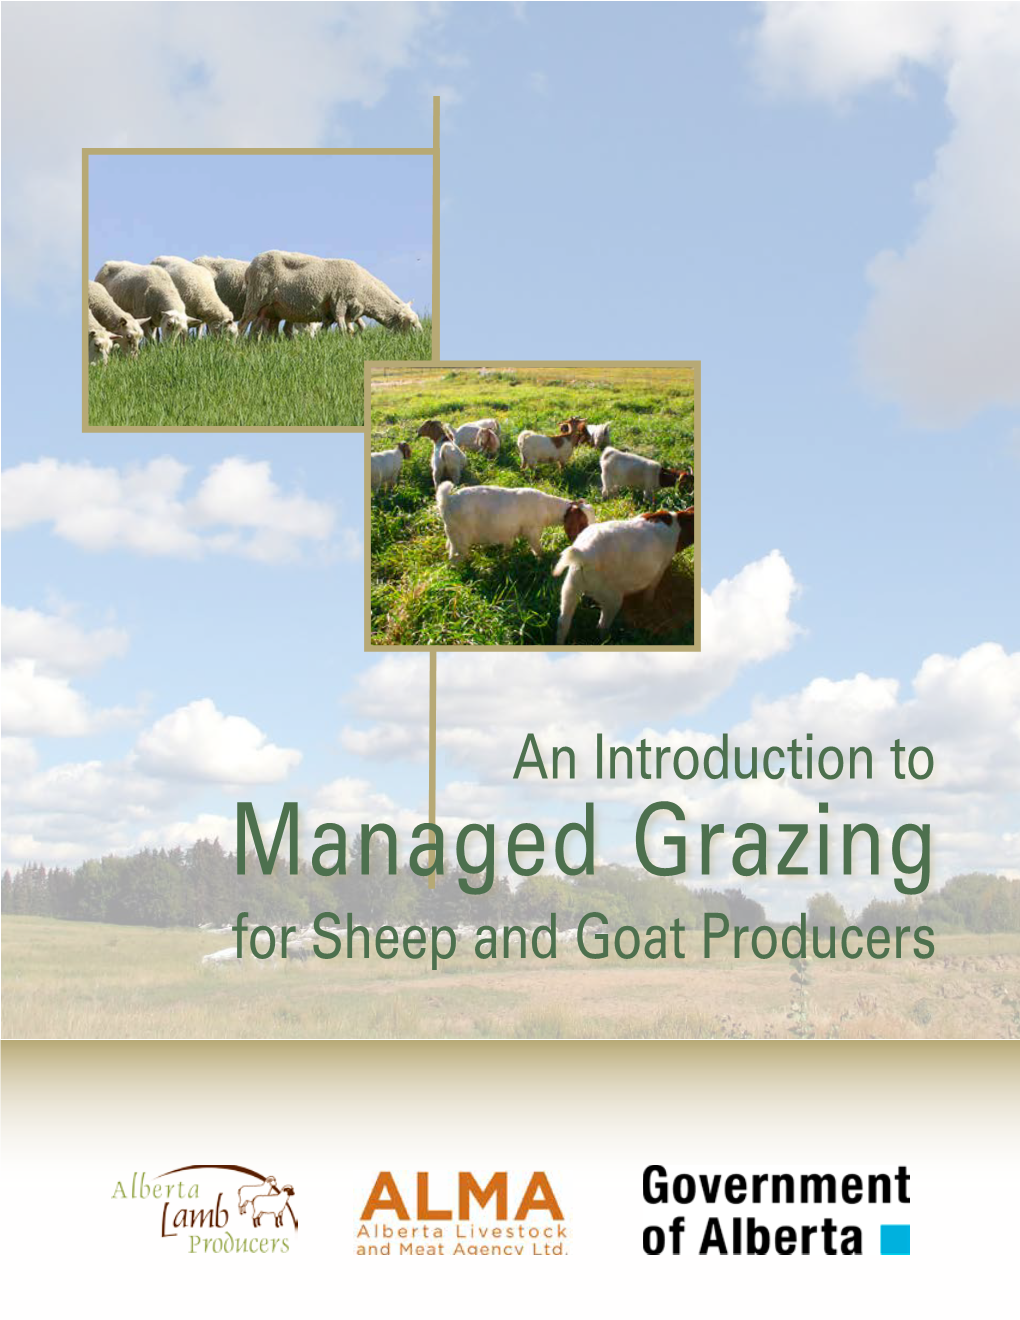 An Introduction to Managed Grazing for Sheep and Goat Producers